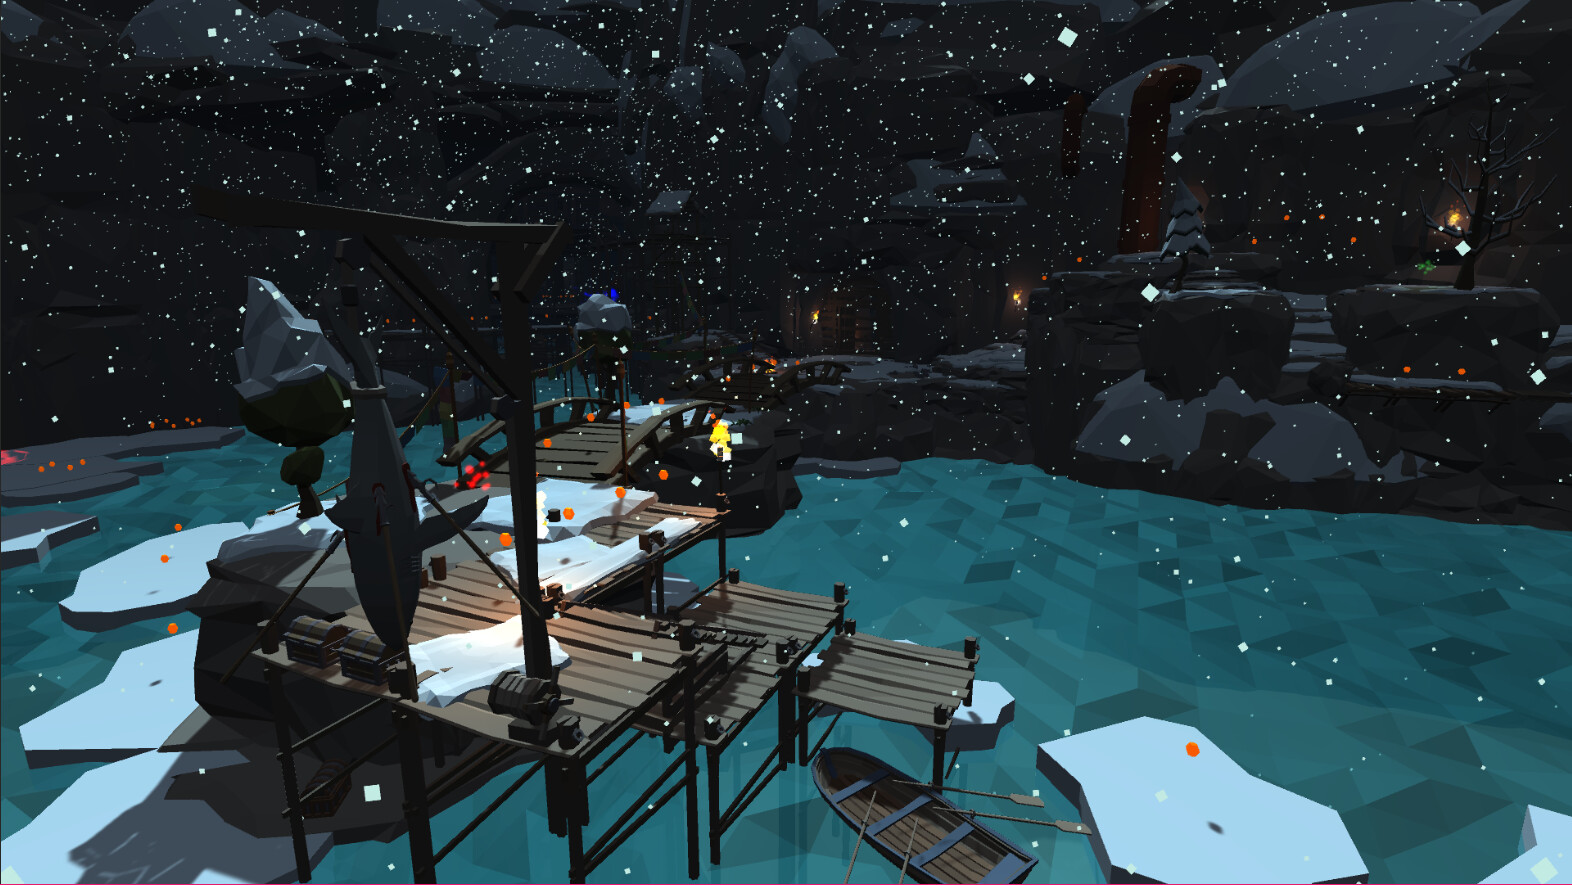 The docks in the opening section of the level where the player spawns. Once the player has recovered the crystal cores they return here to complete the game.